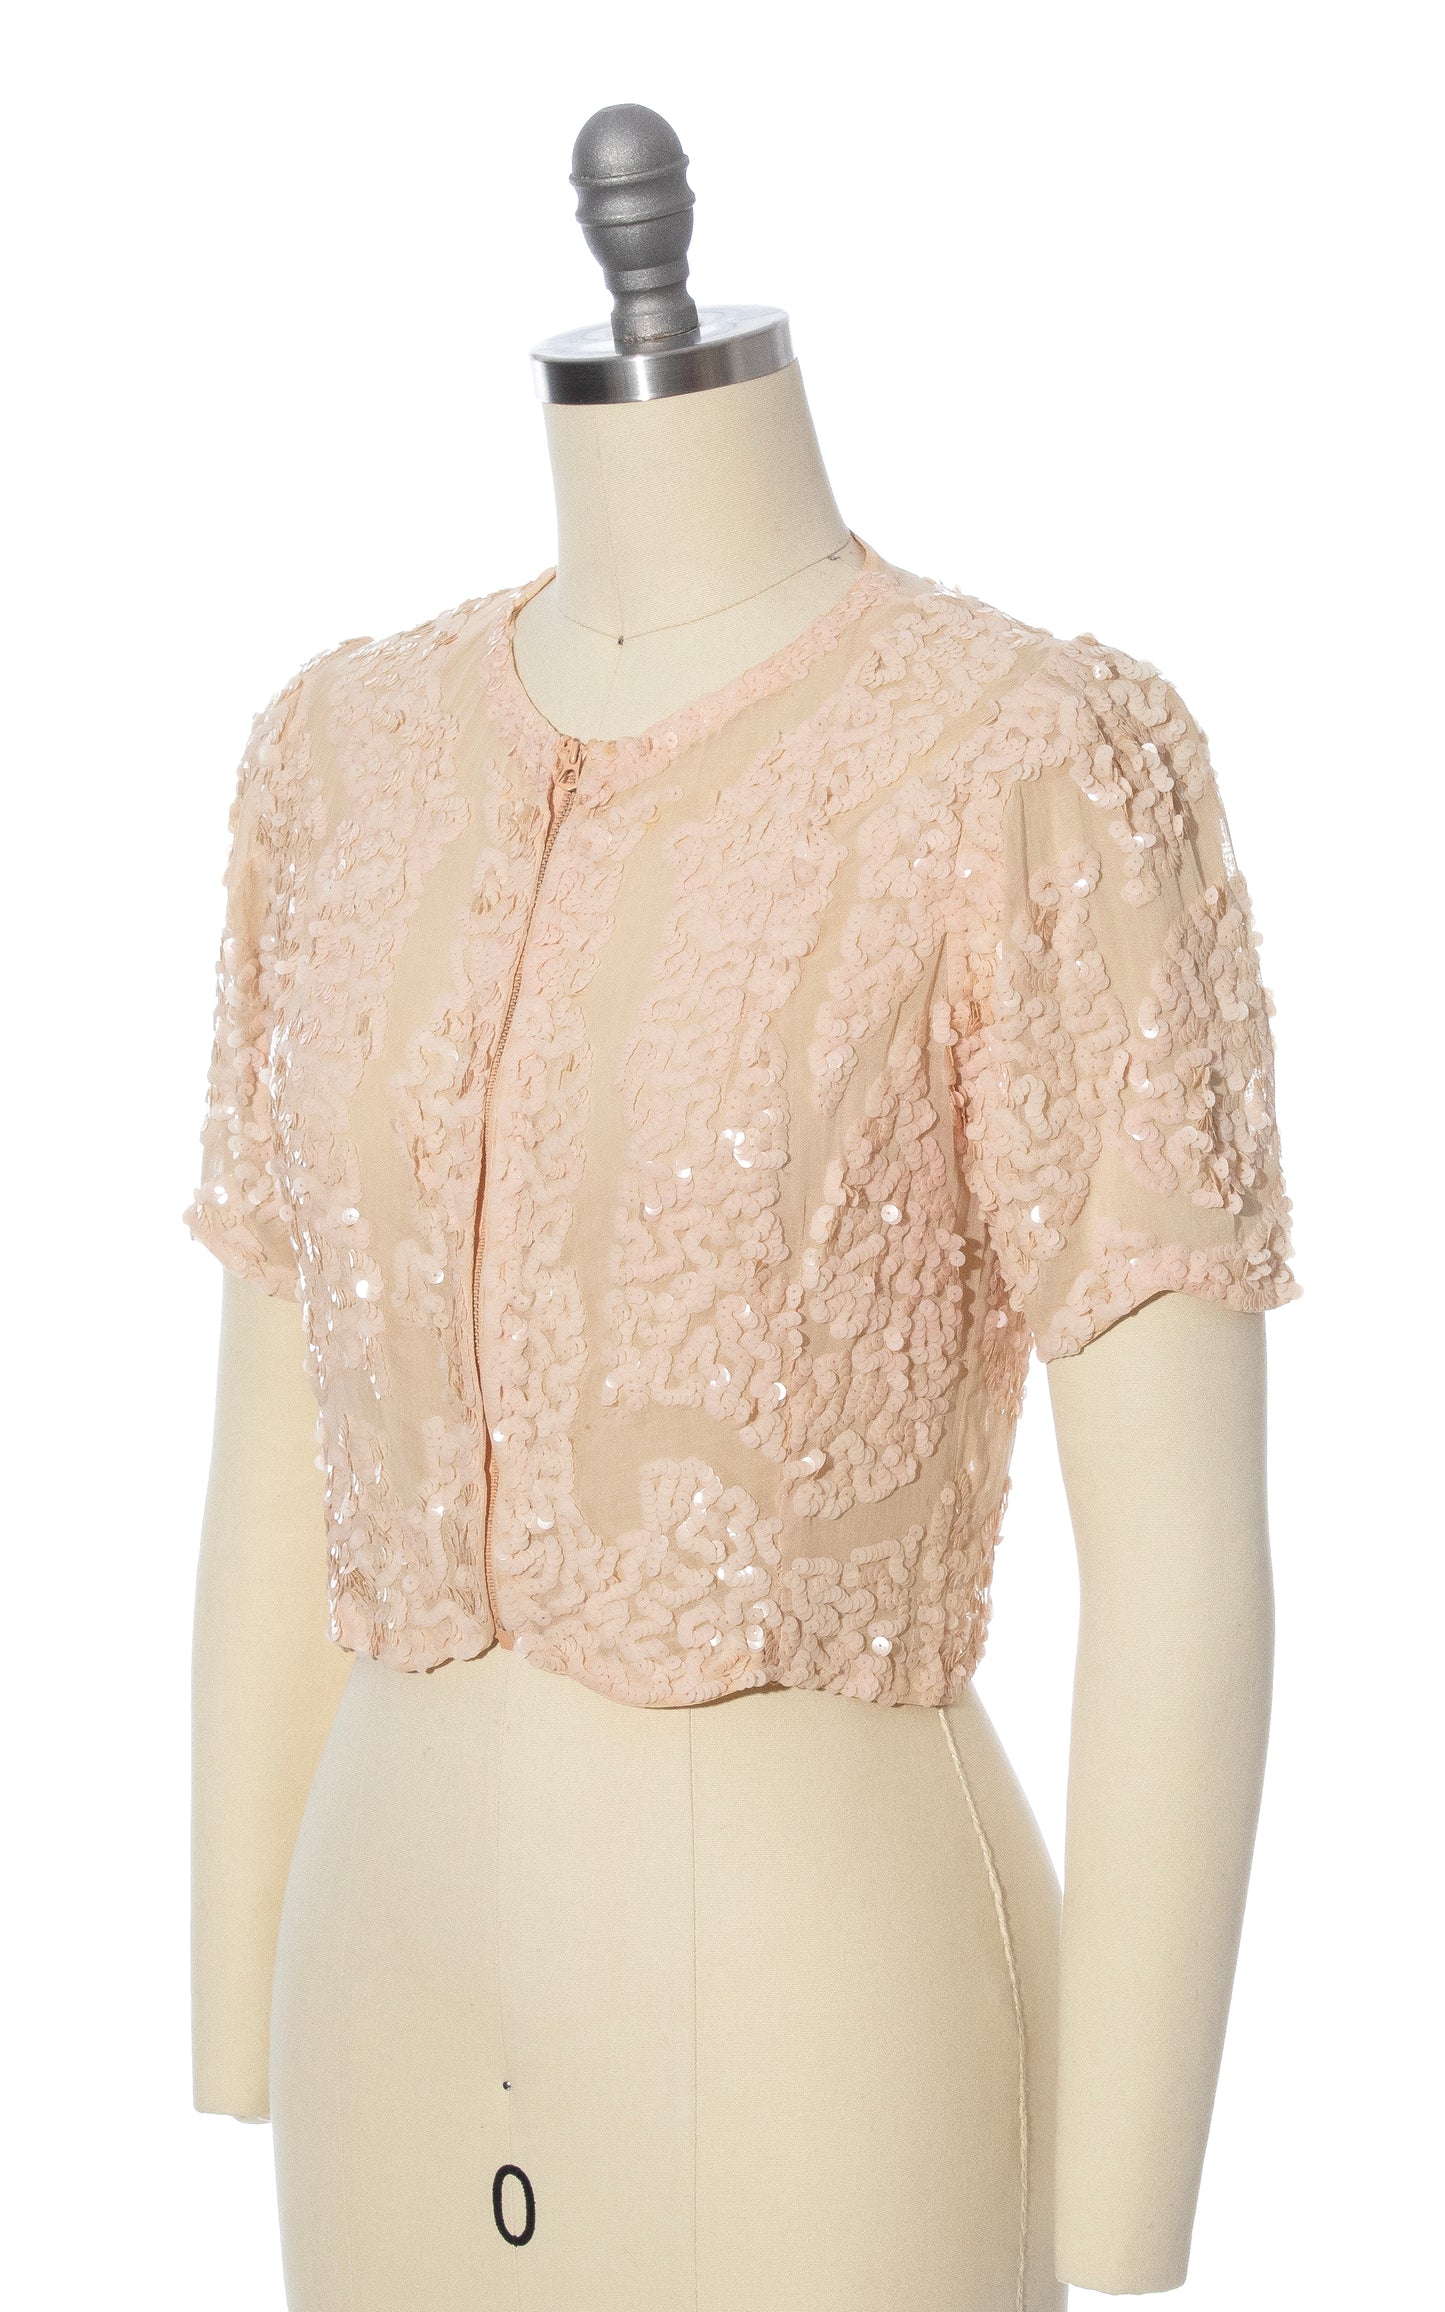 Vintage 30s 1930s Peach Sequined Scalloped Top BirthdayLifeVintage